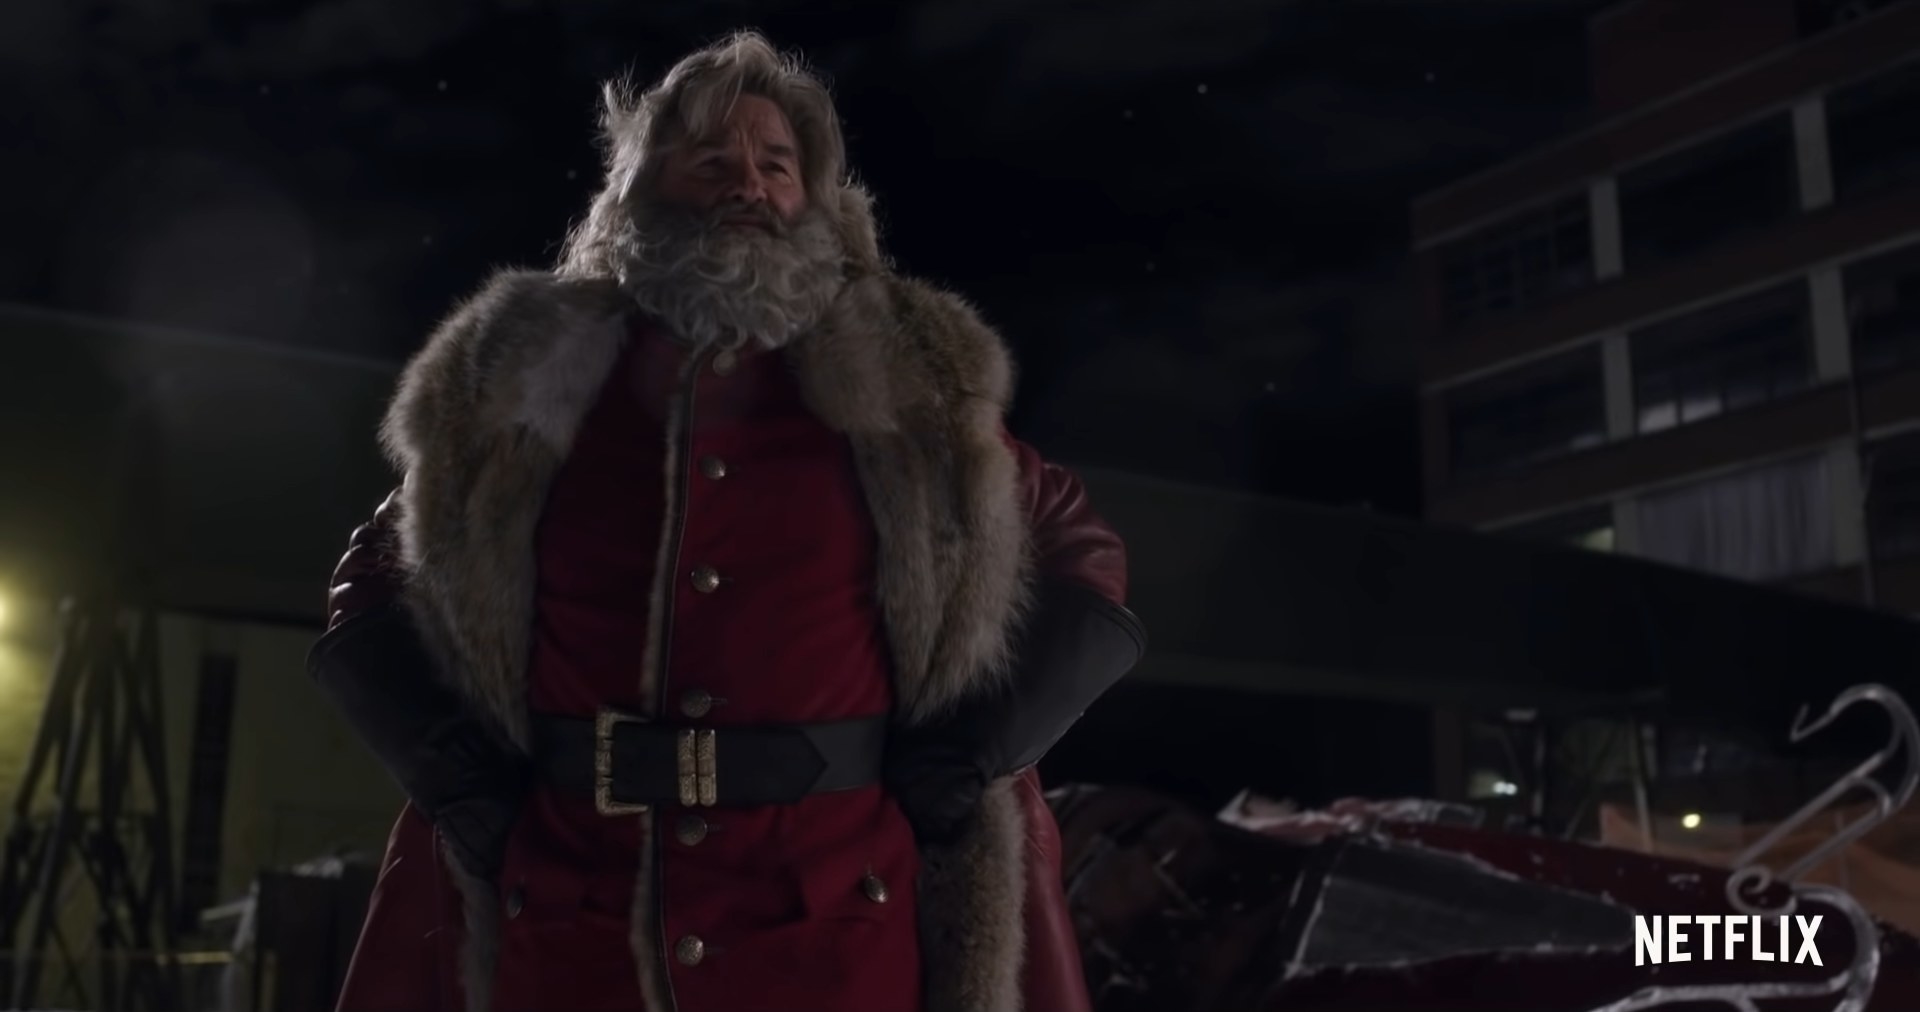 A man dressed as Santa Claus stands.